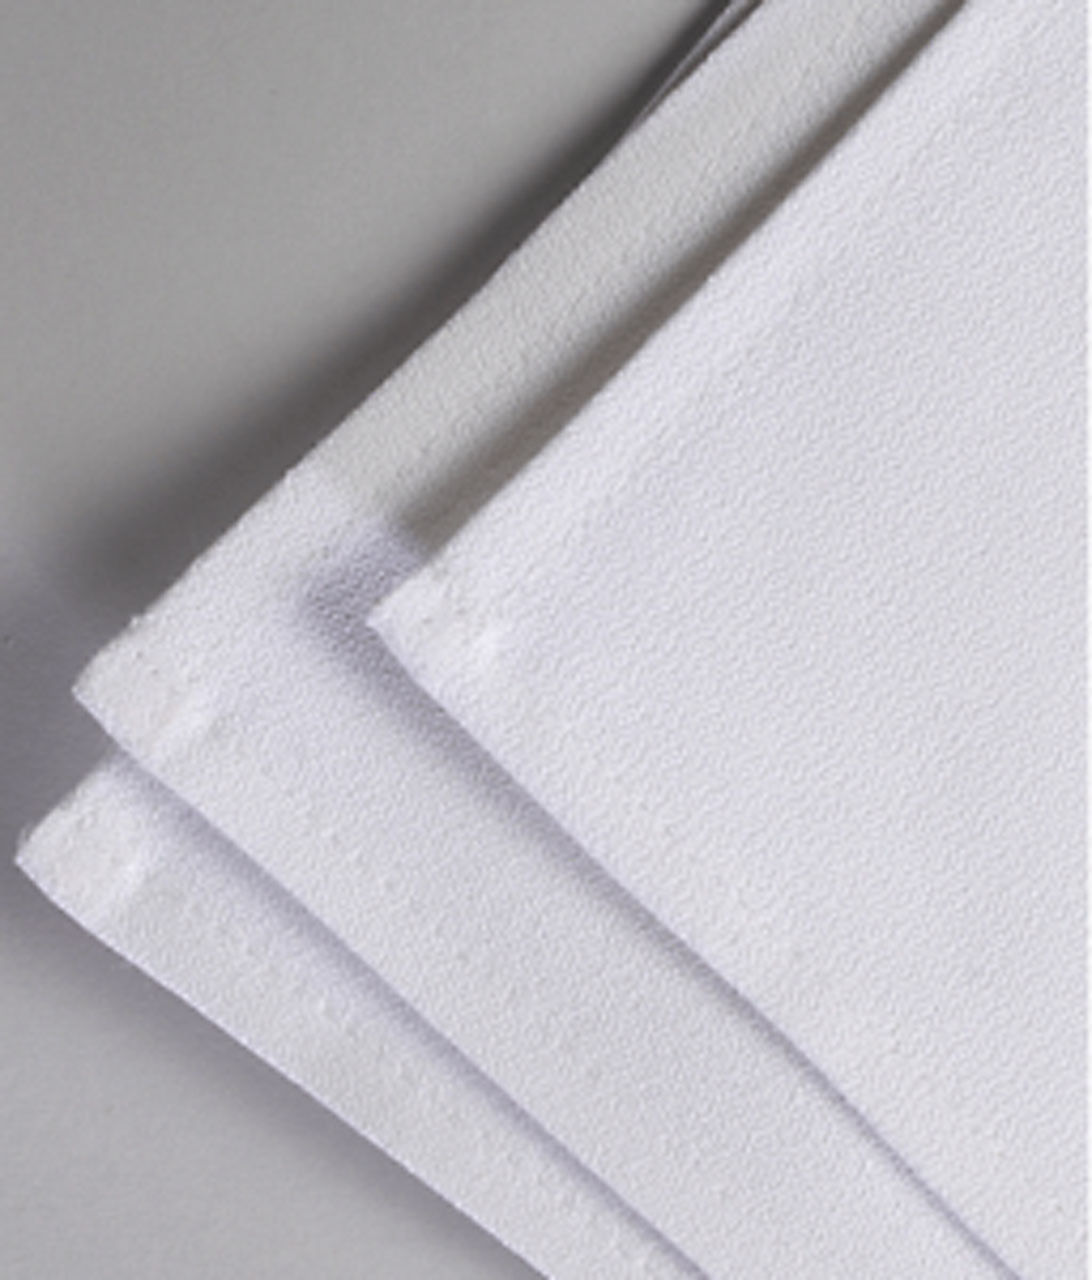 What fabric is best for linen napkins?